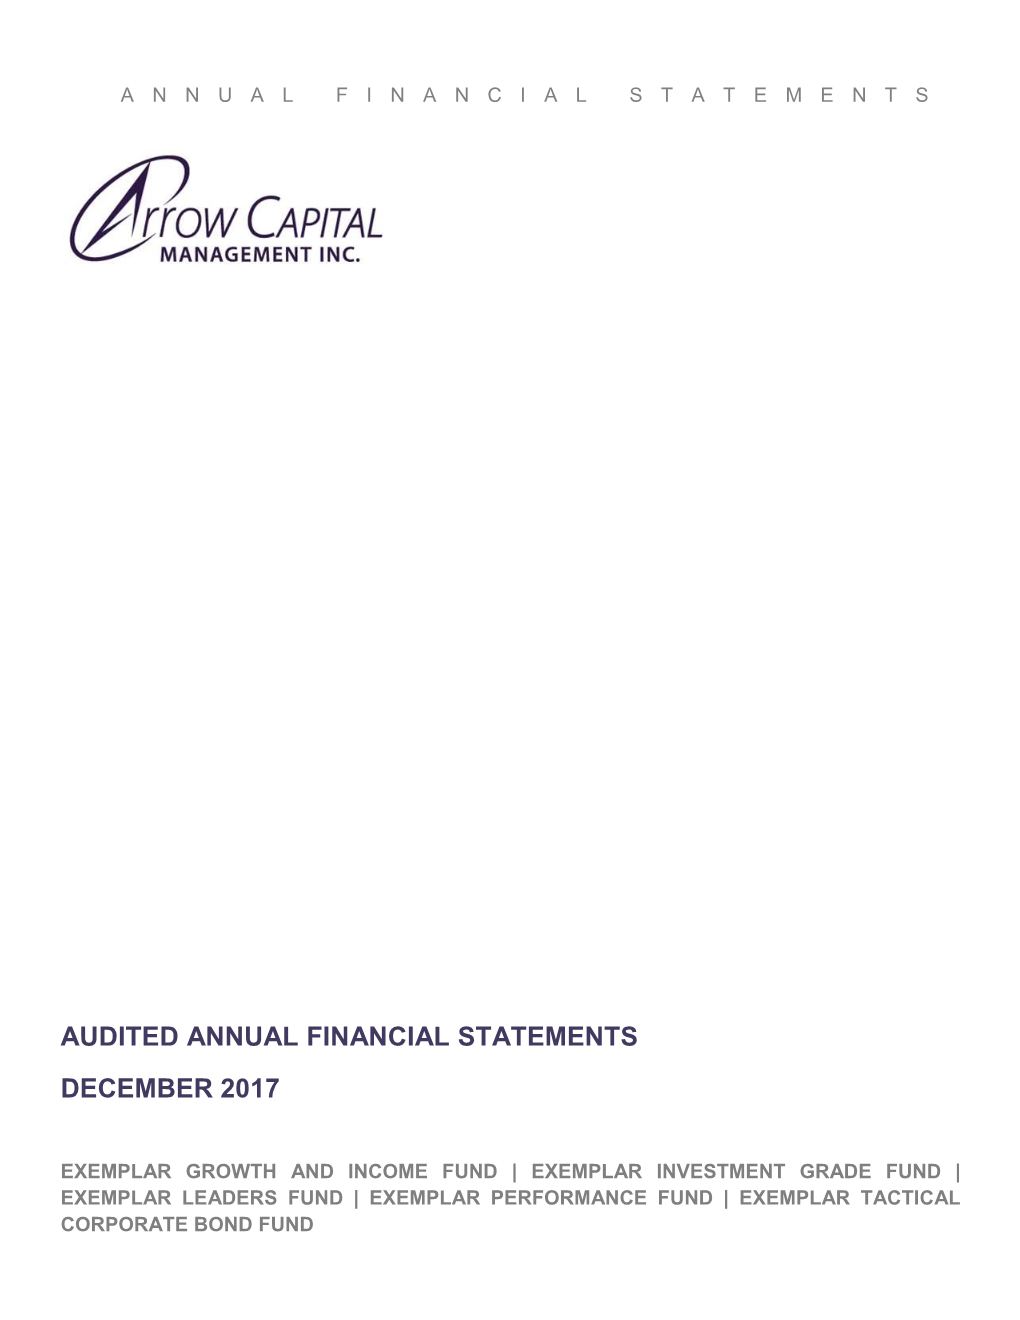 2017 Annual Financial Statements